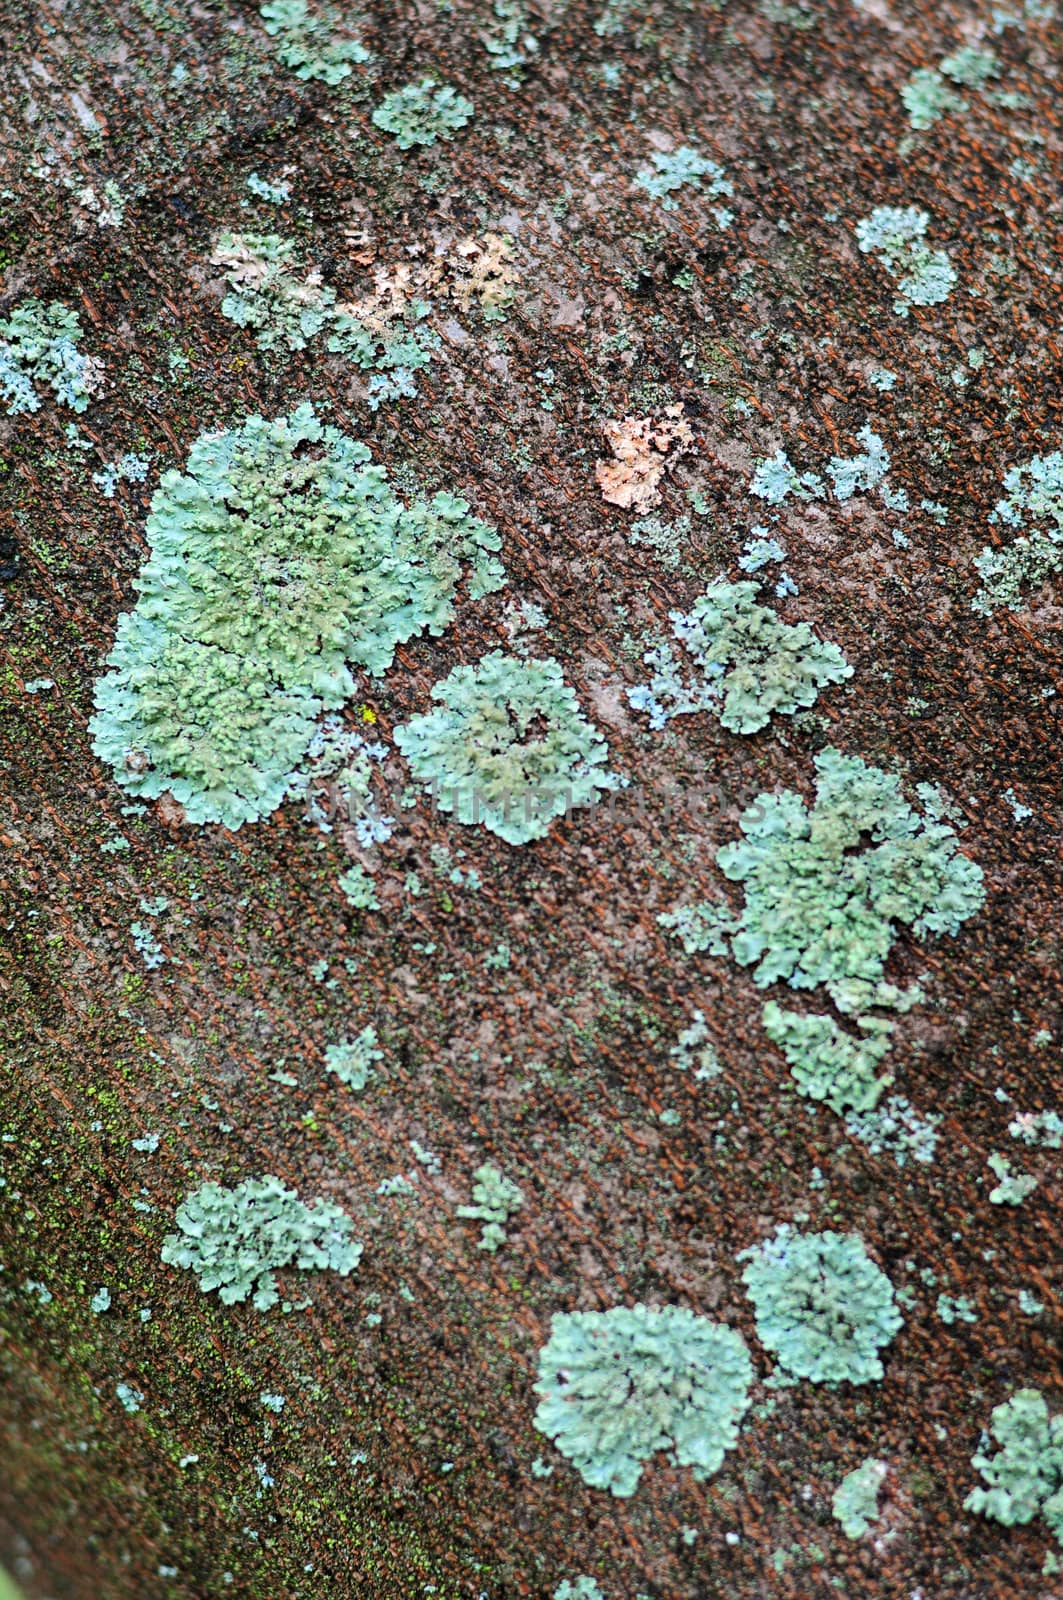 Green fungus growth on tree bark in nature